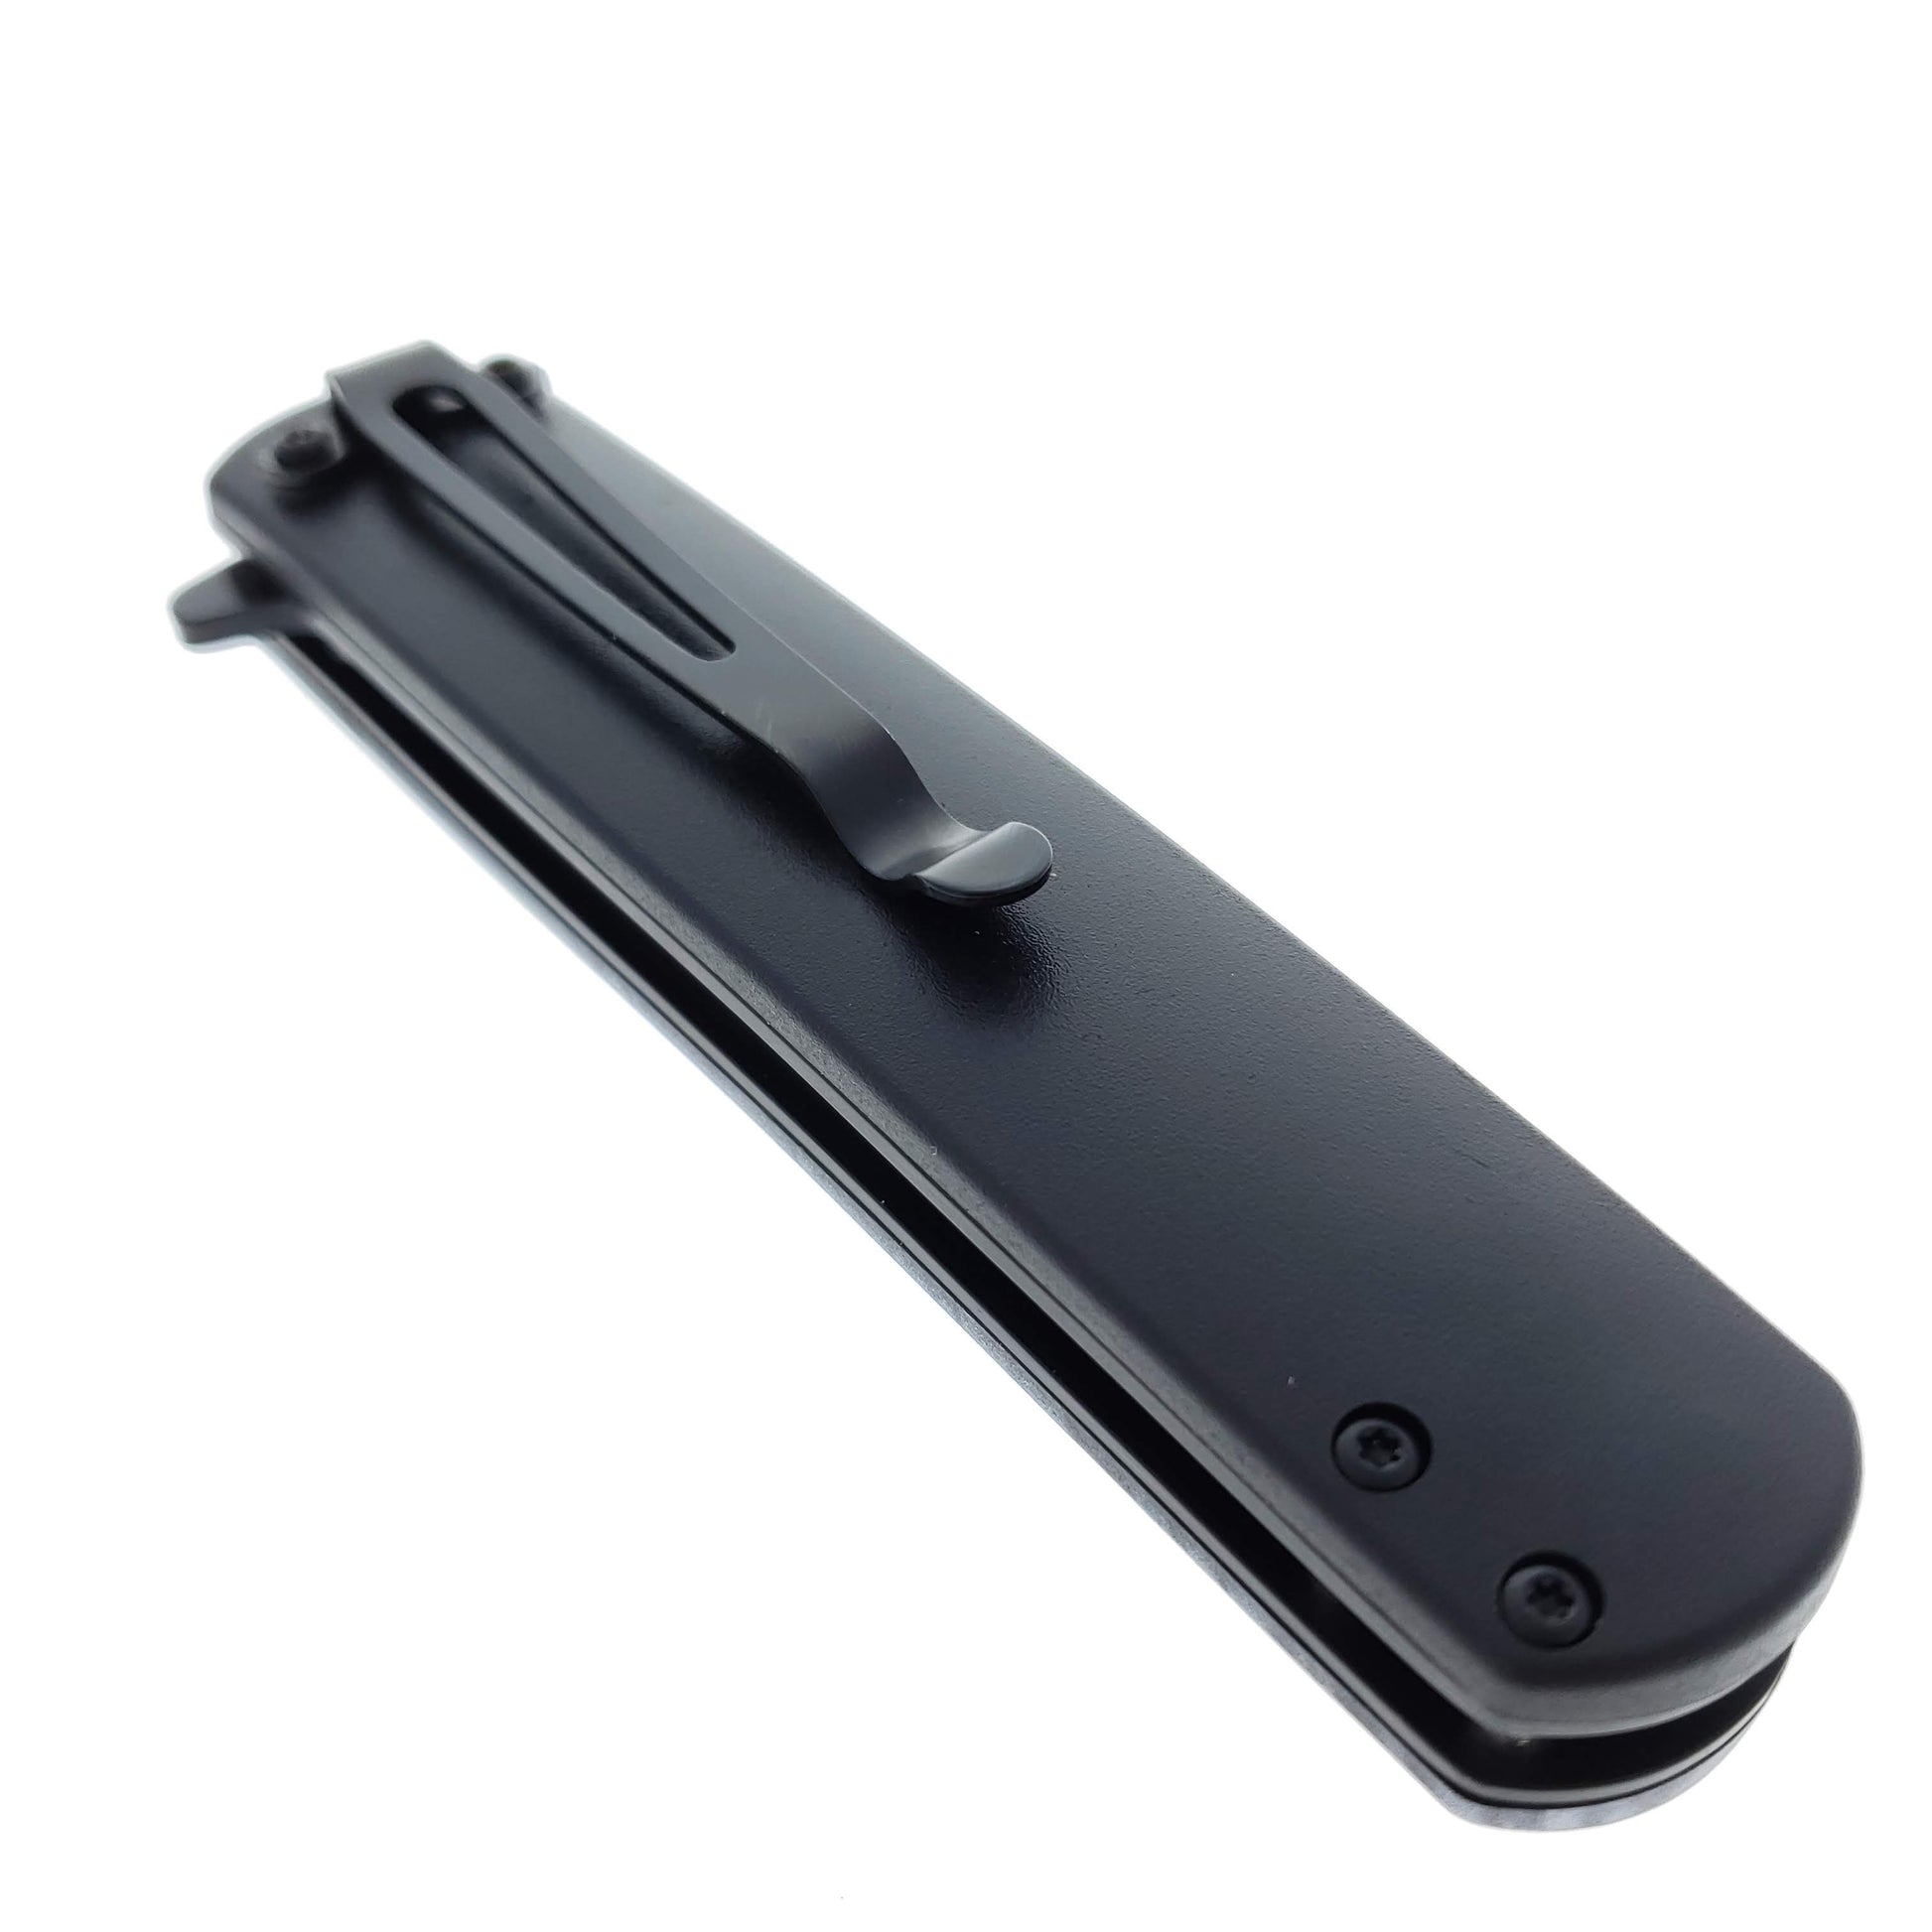 Buy Blue Tanto Pocket Knife Wholesale Price Online: Pacific Solution.